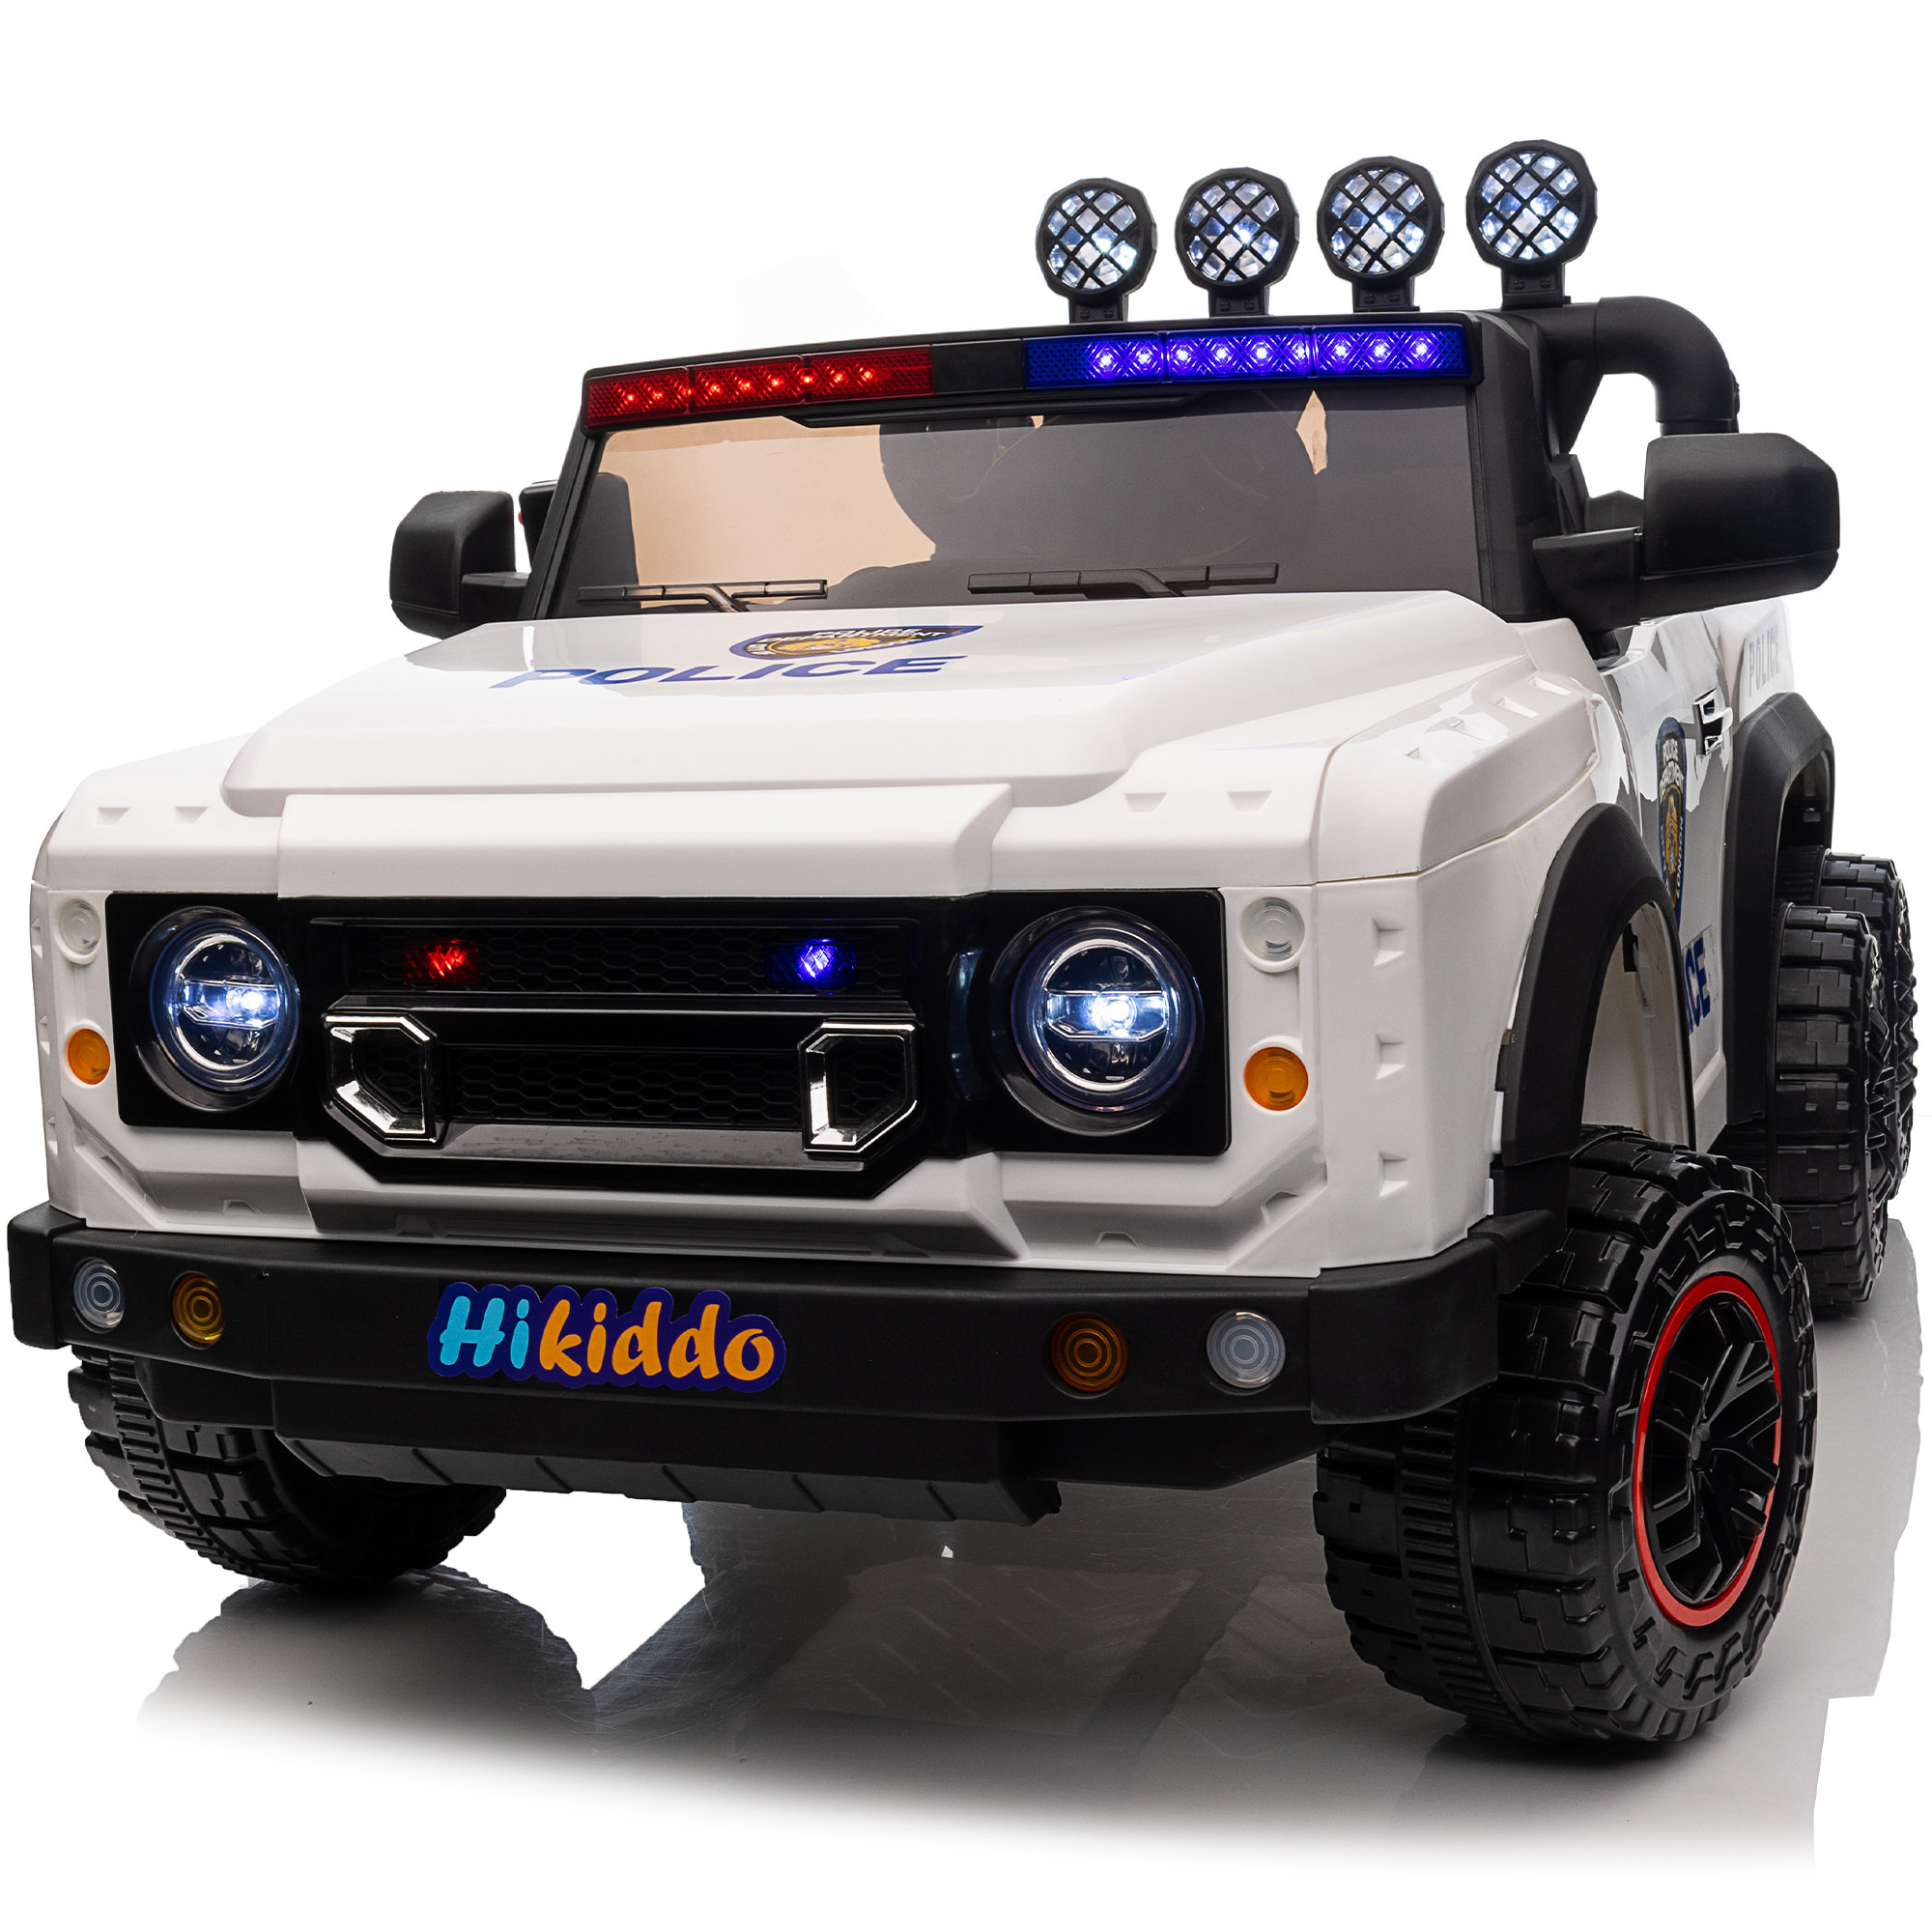 Hikiddo 24V Ride on Toys, 2-Seater Ride on Police Car Truck with